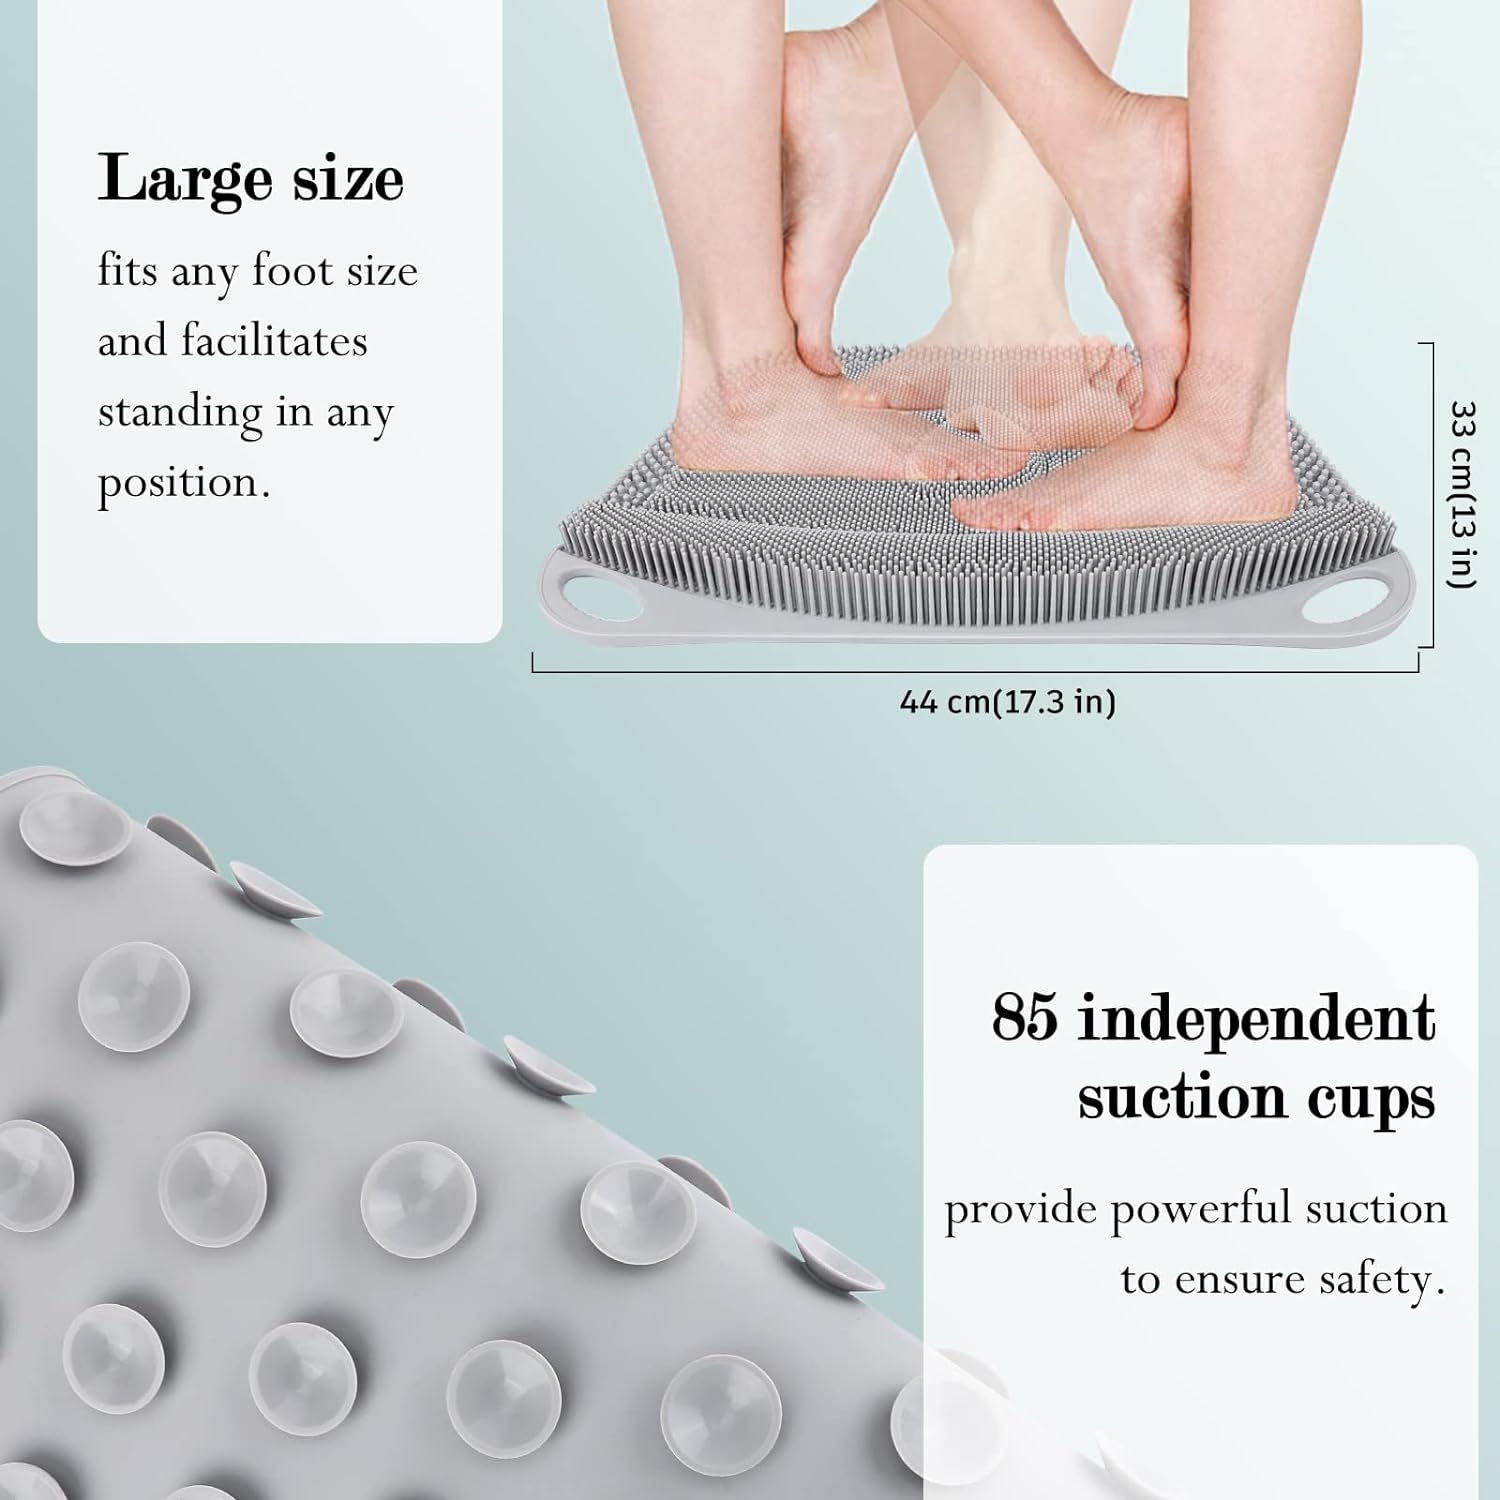 Large Silicone Foot Scrubber Mat - Shower Foot Cleaner Brush to Clean, Exfoliate and Massage Feet without Bending Over, Improve Foot Appearance and Overall Health, Grey - 17.3" X 13"